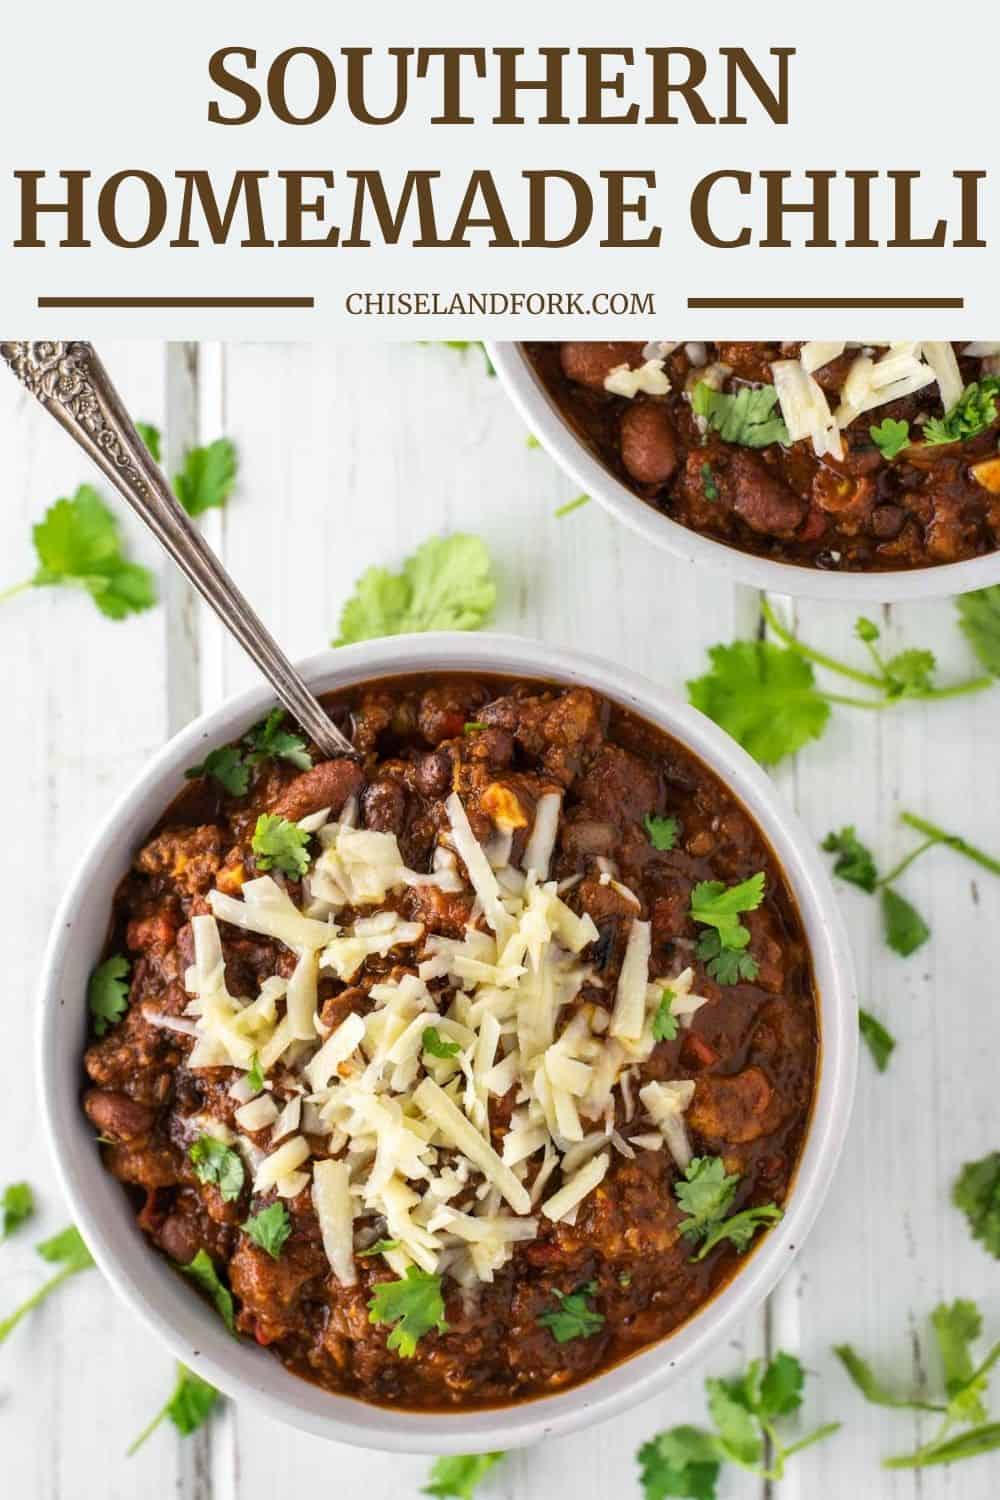 Southern Homemade Chili Recipe - The Best Out There - Chisel & Fork